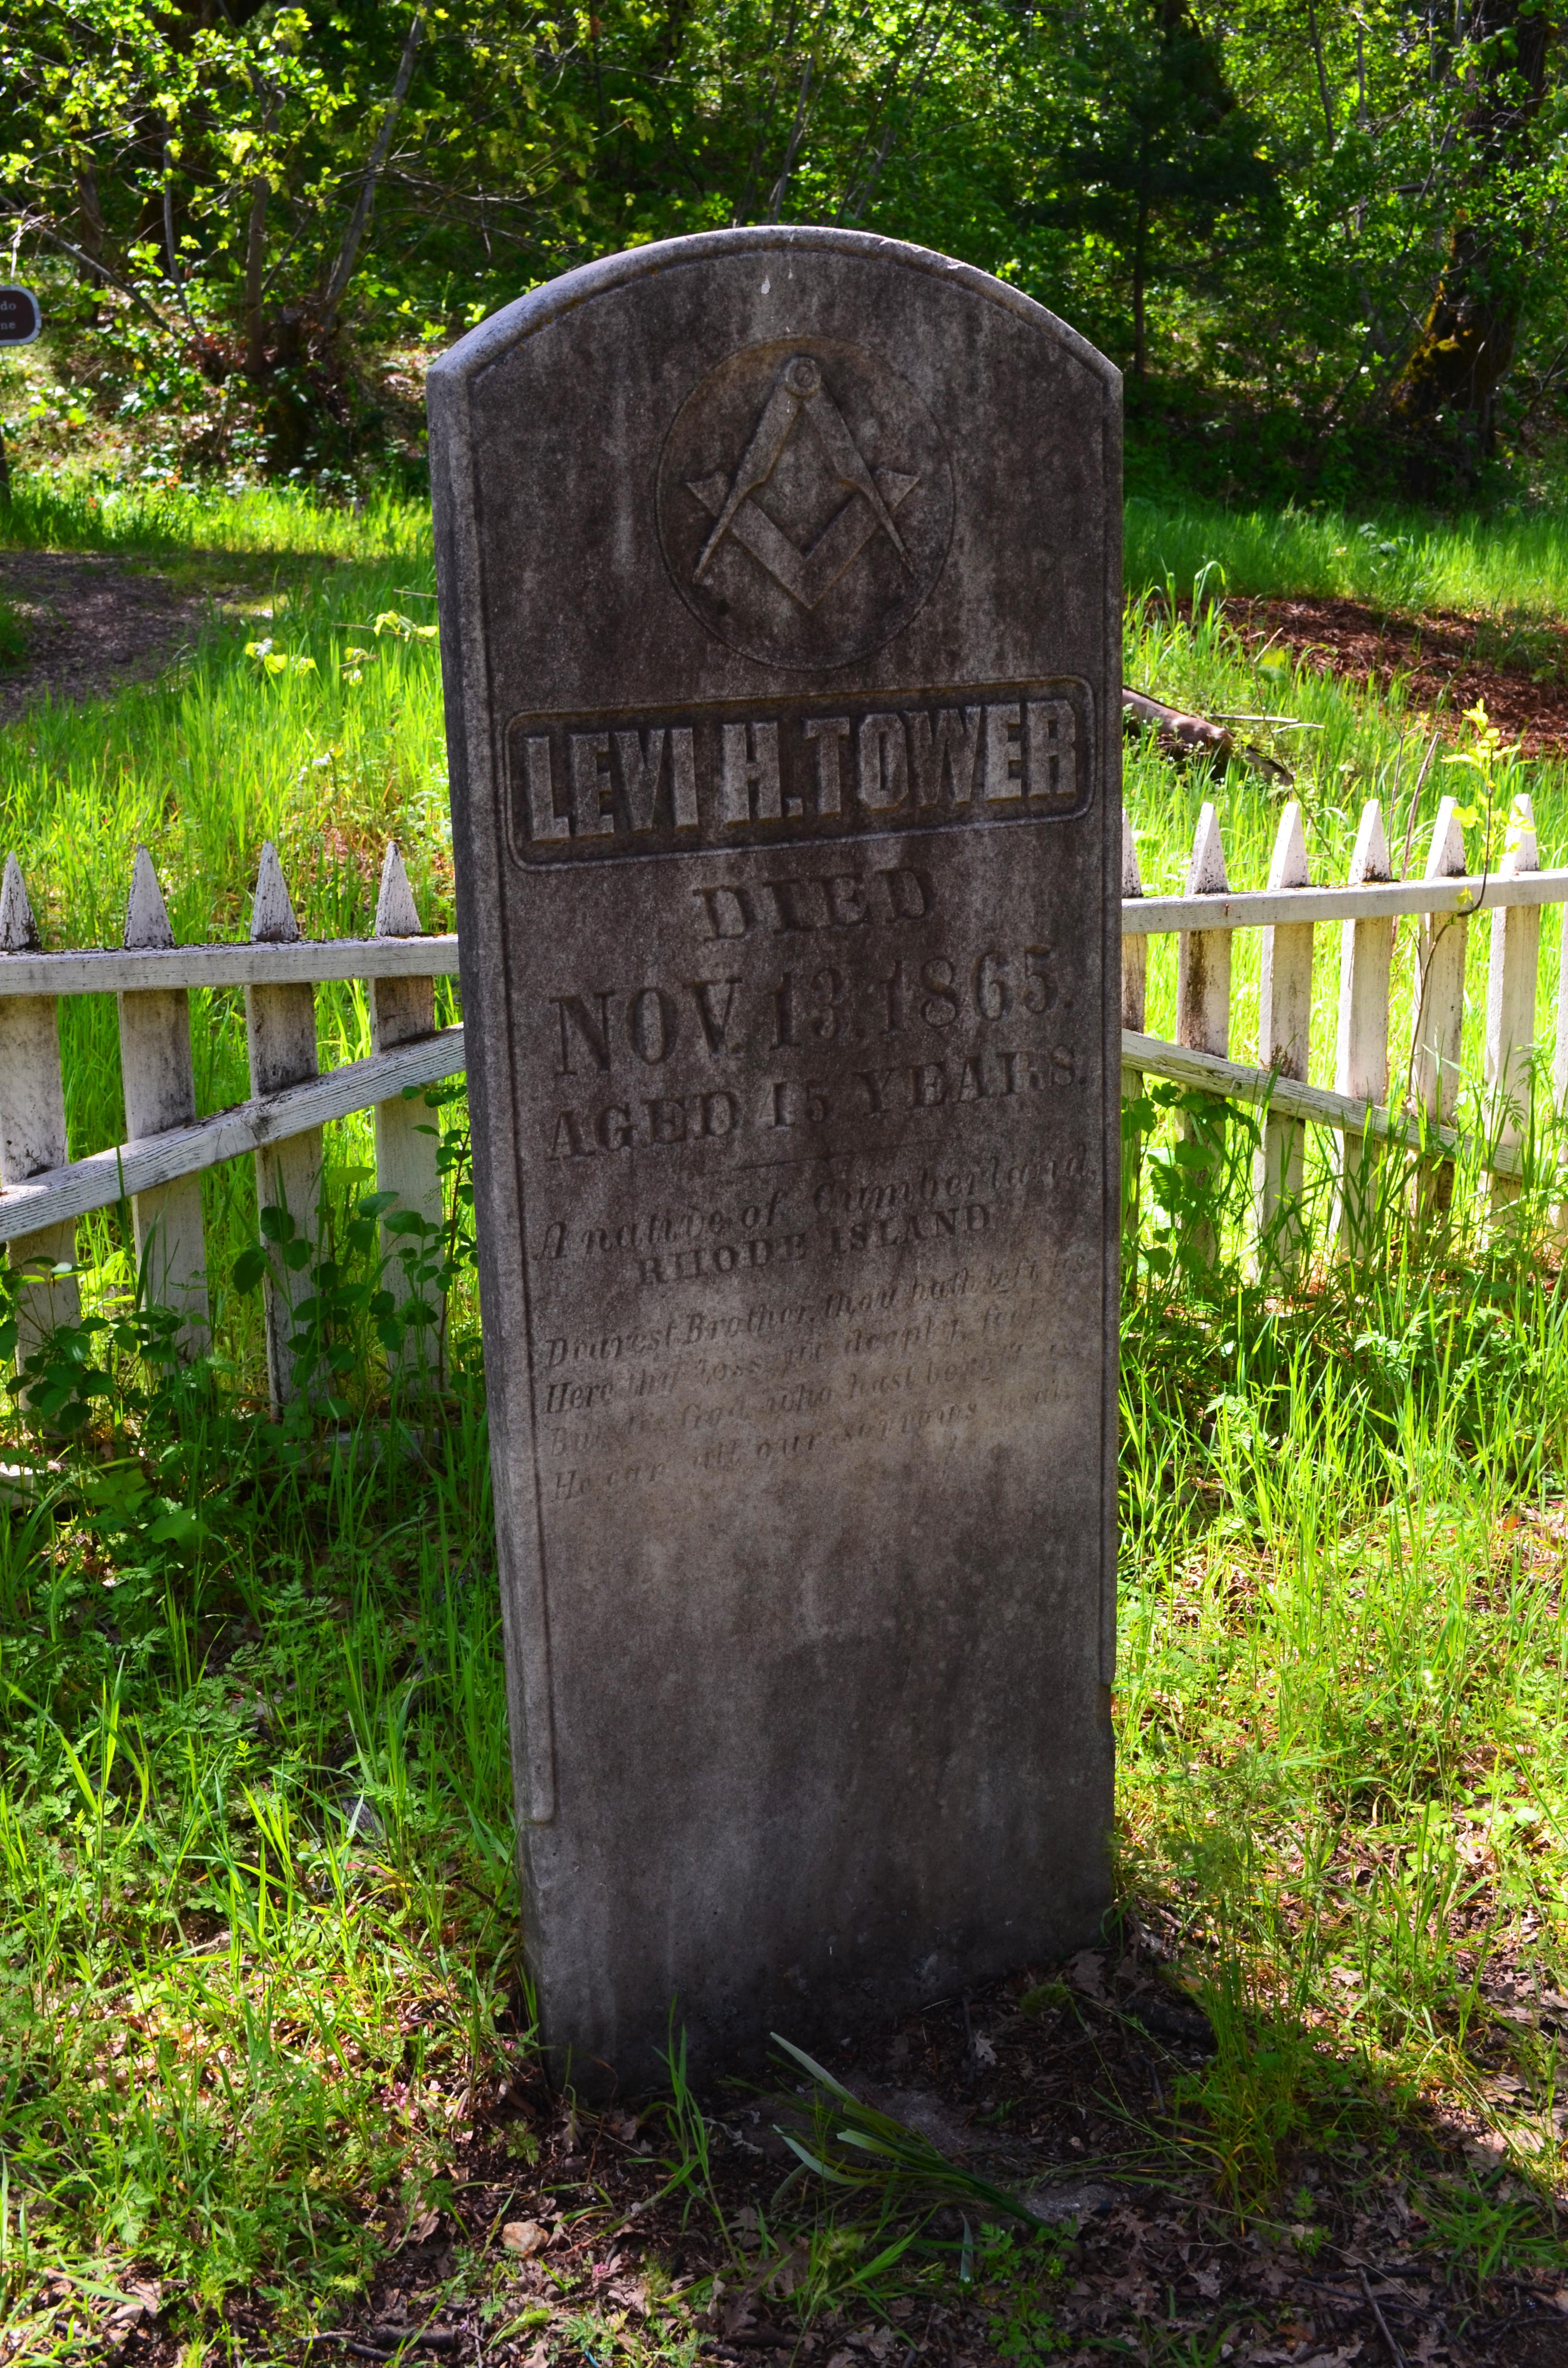 Levi Tower Gravesite Located in the Tower House Historic District